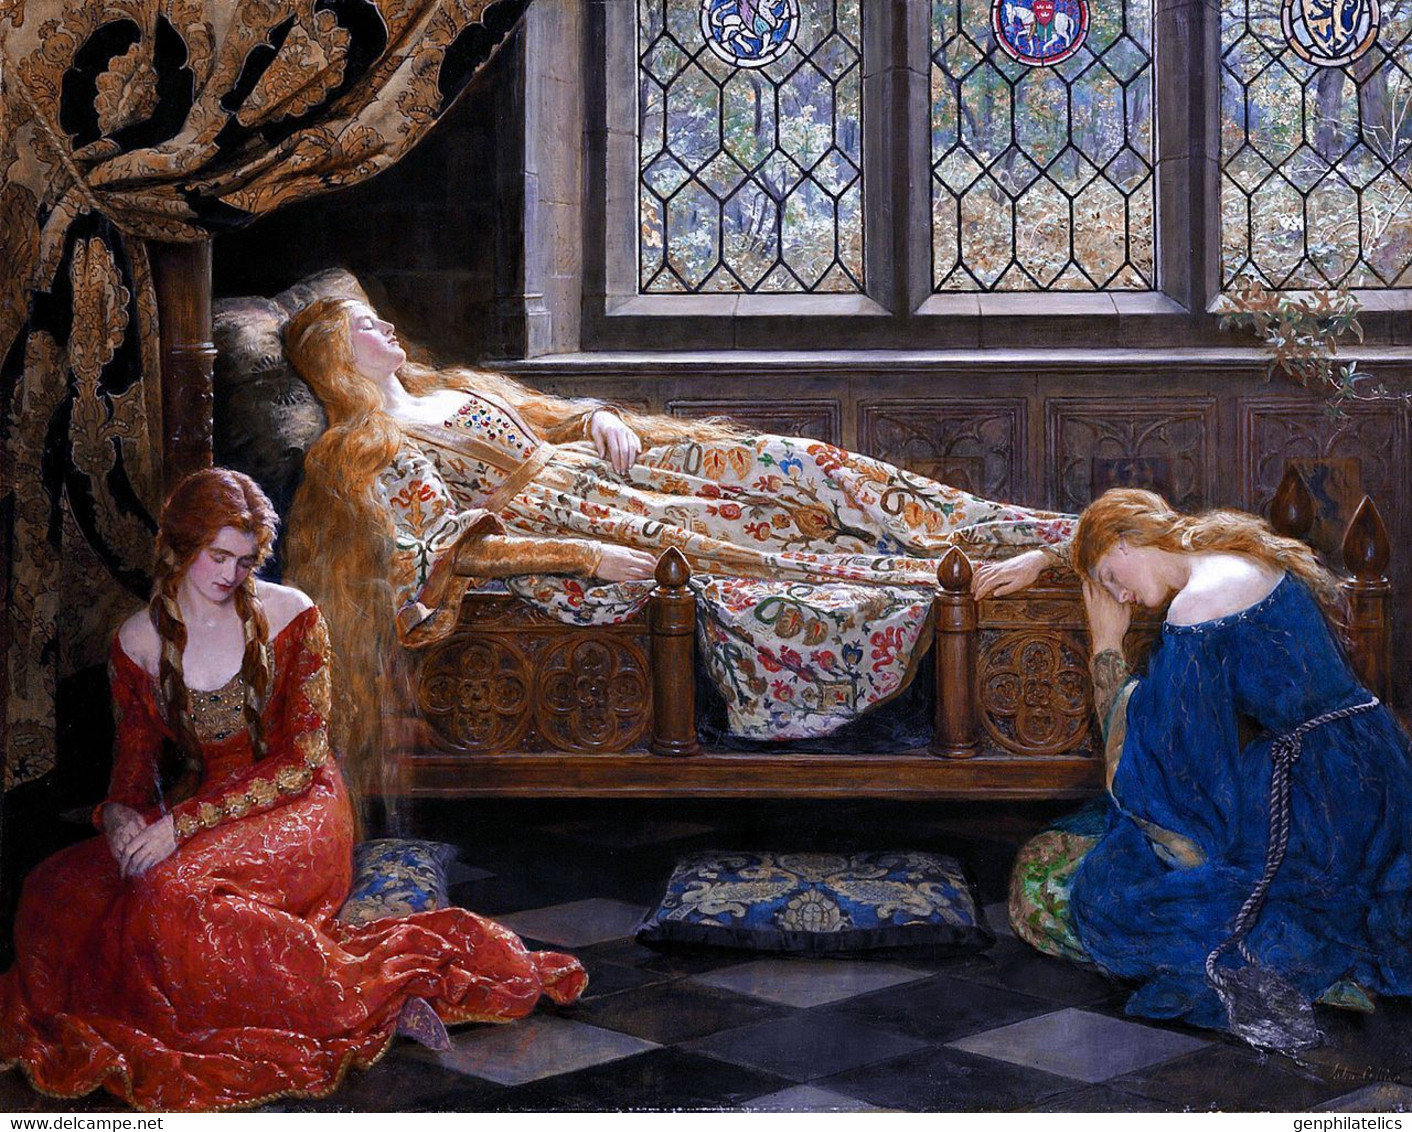 NEW D-Toys Jigsaw Puzzle 1000 Pieces Tiles John Collier "The Sleeping Beauty" - Puzzle Games